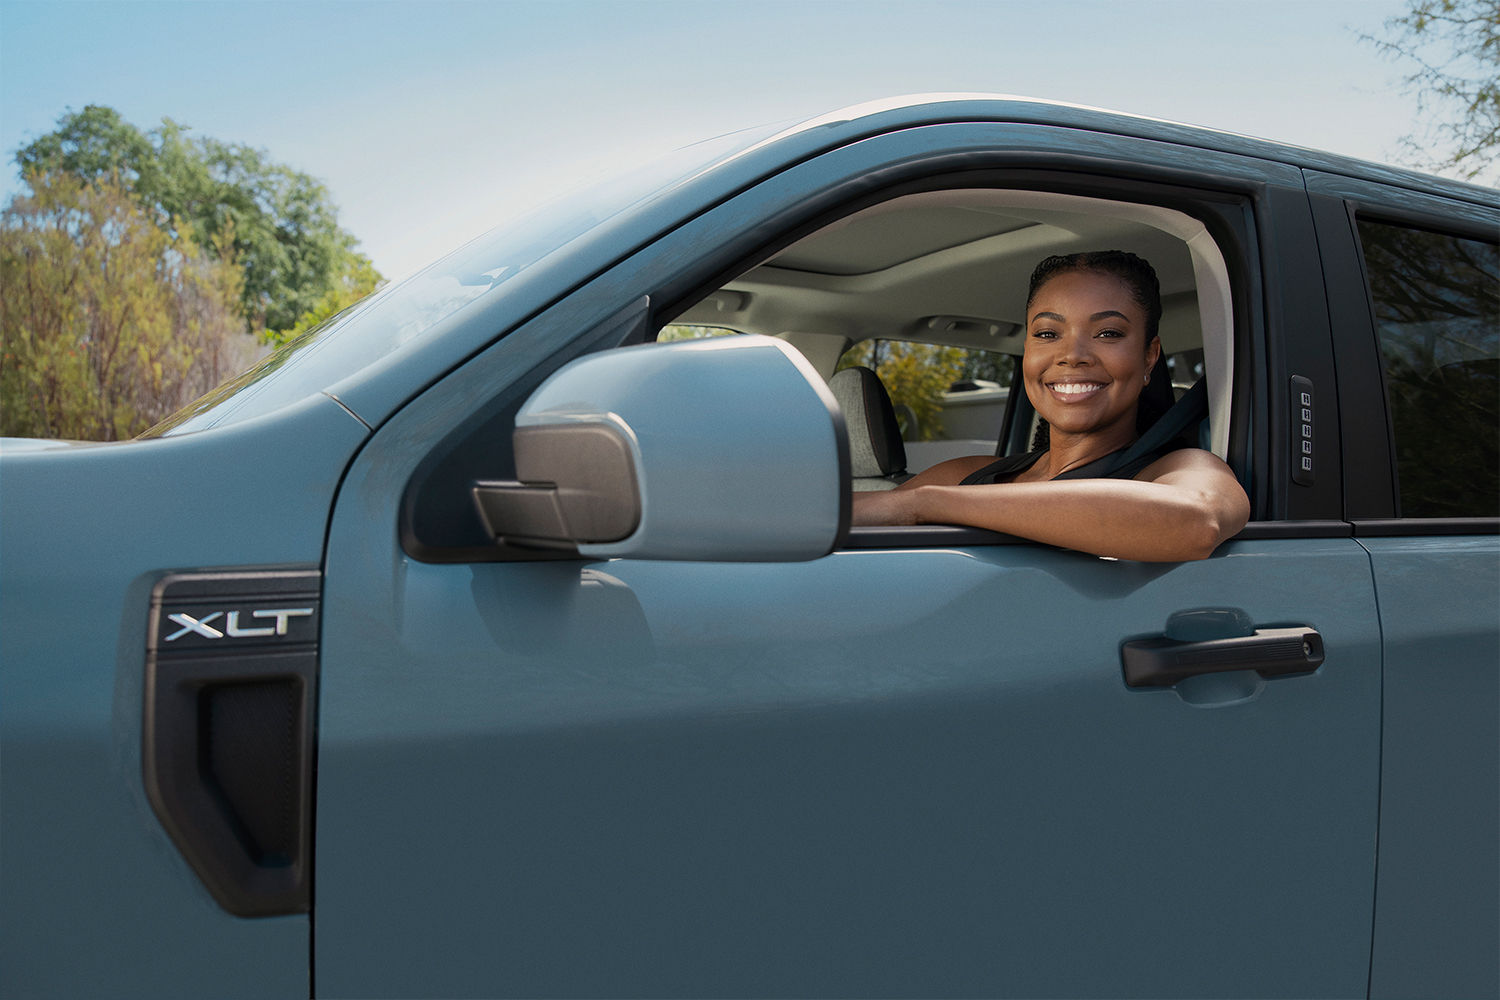 Actress Gabrielle Union driving the new 2022 Ford Maverick pickup truck